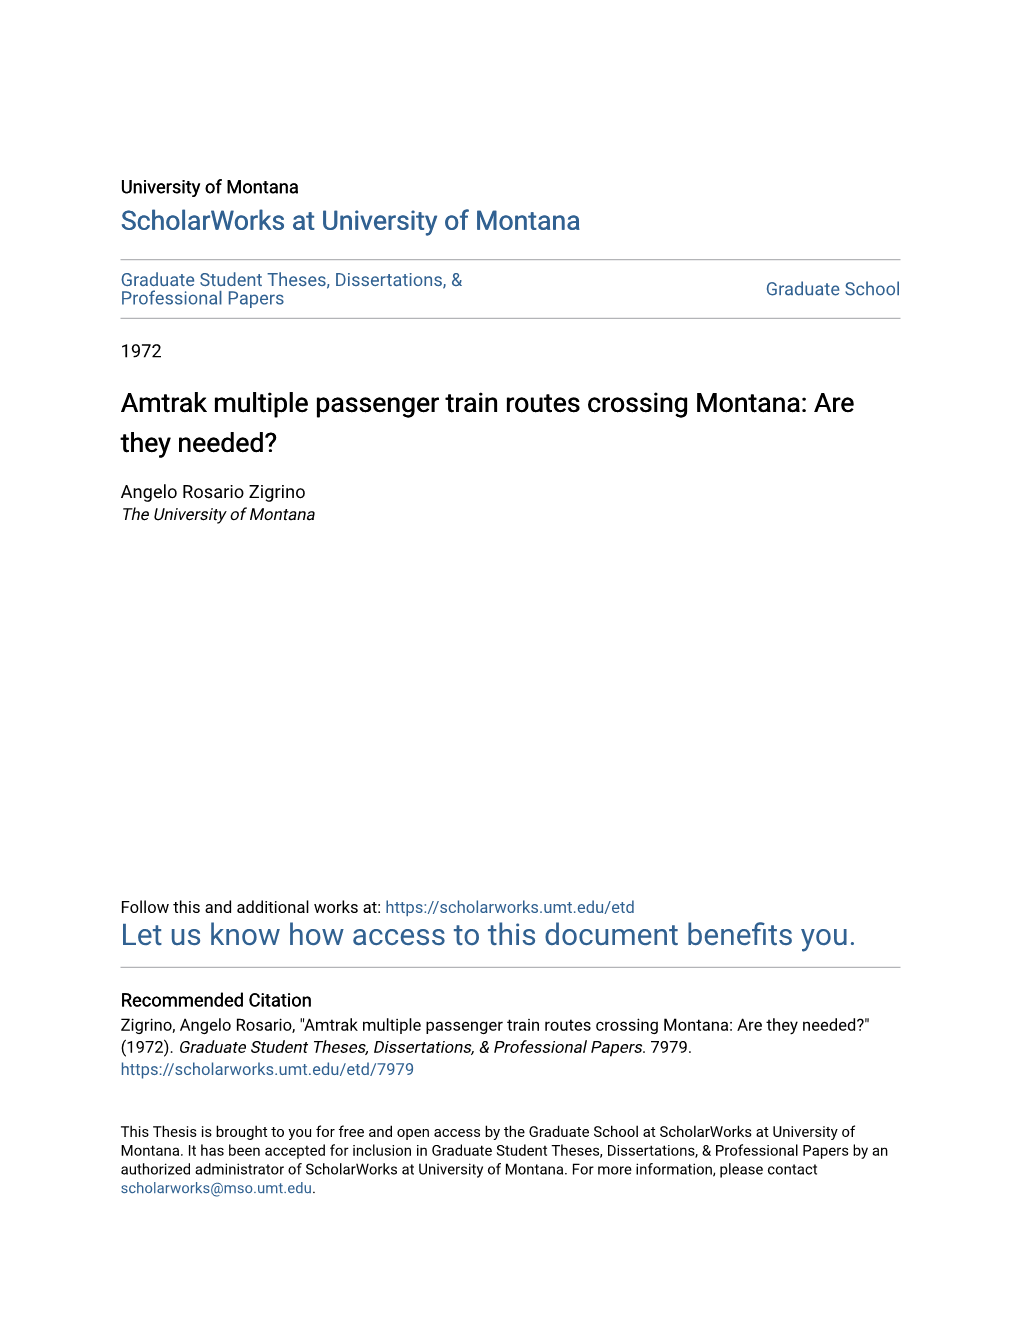 Amtrak Multiple Passenger Train Routes Crossing Montana: Are They Needed?